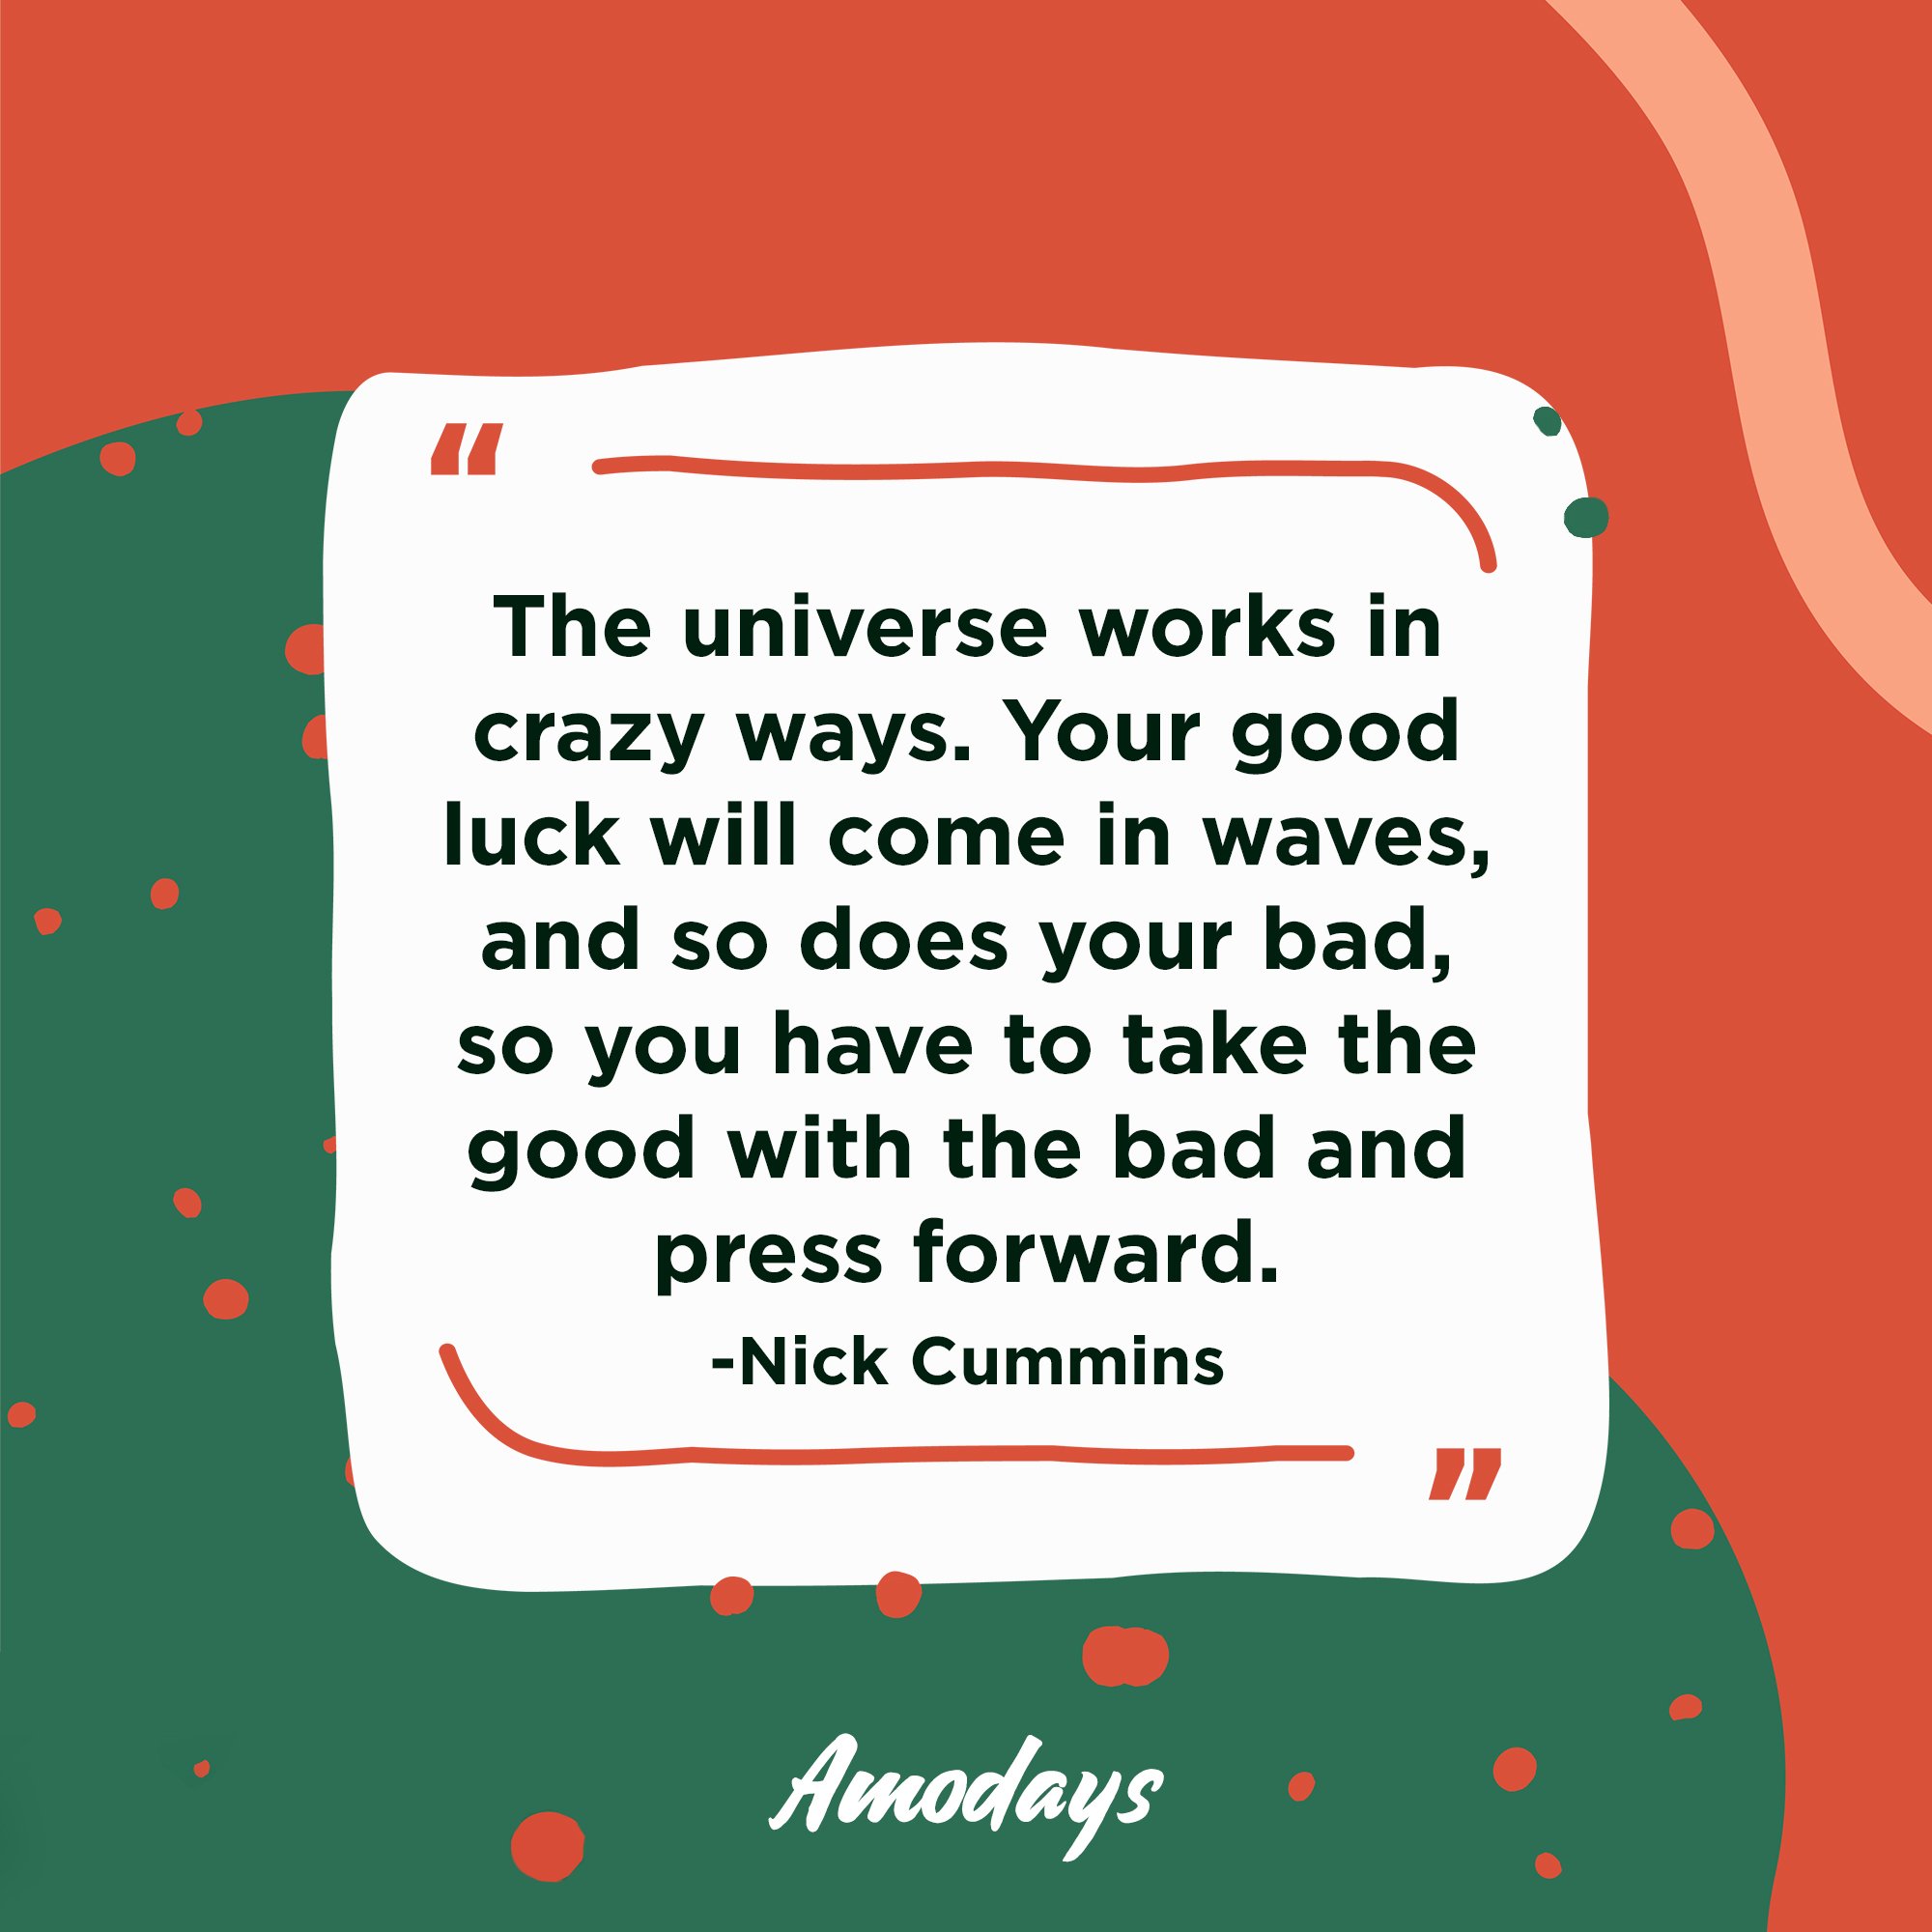 Nick Cummins's quote: “The universe works in crazy ways. Your good luck will come in waves, and so does your bad, so you have to take the good with the bad and press forward.” | Image: AmoDays